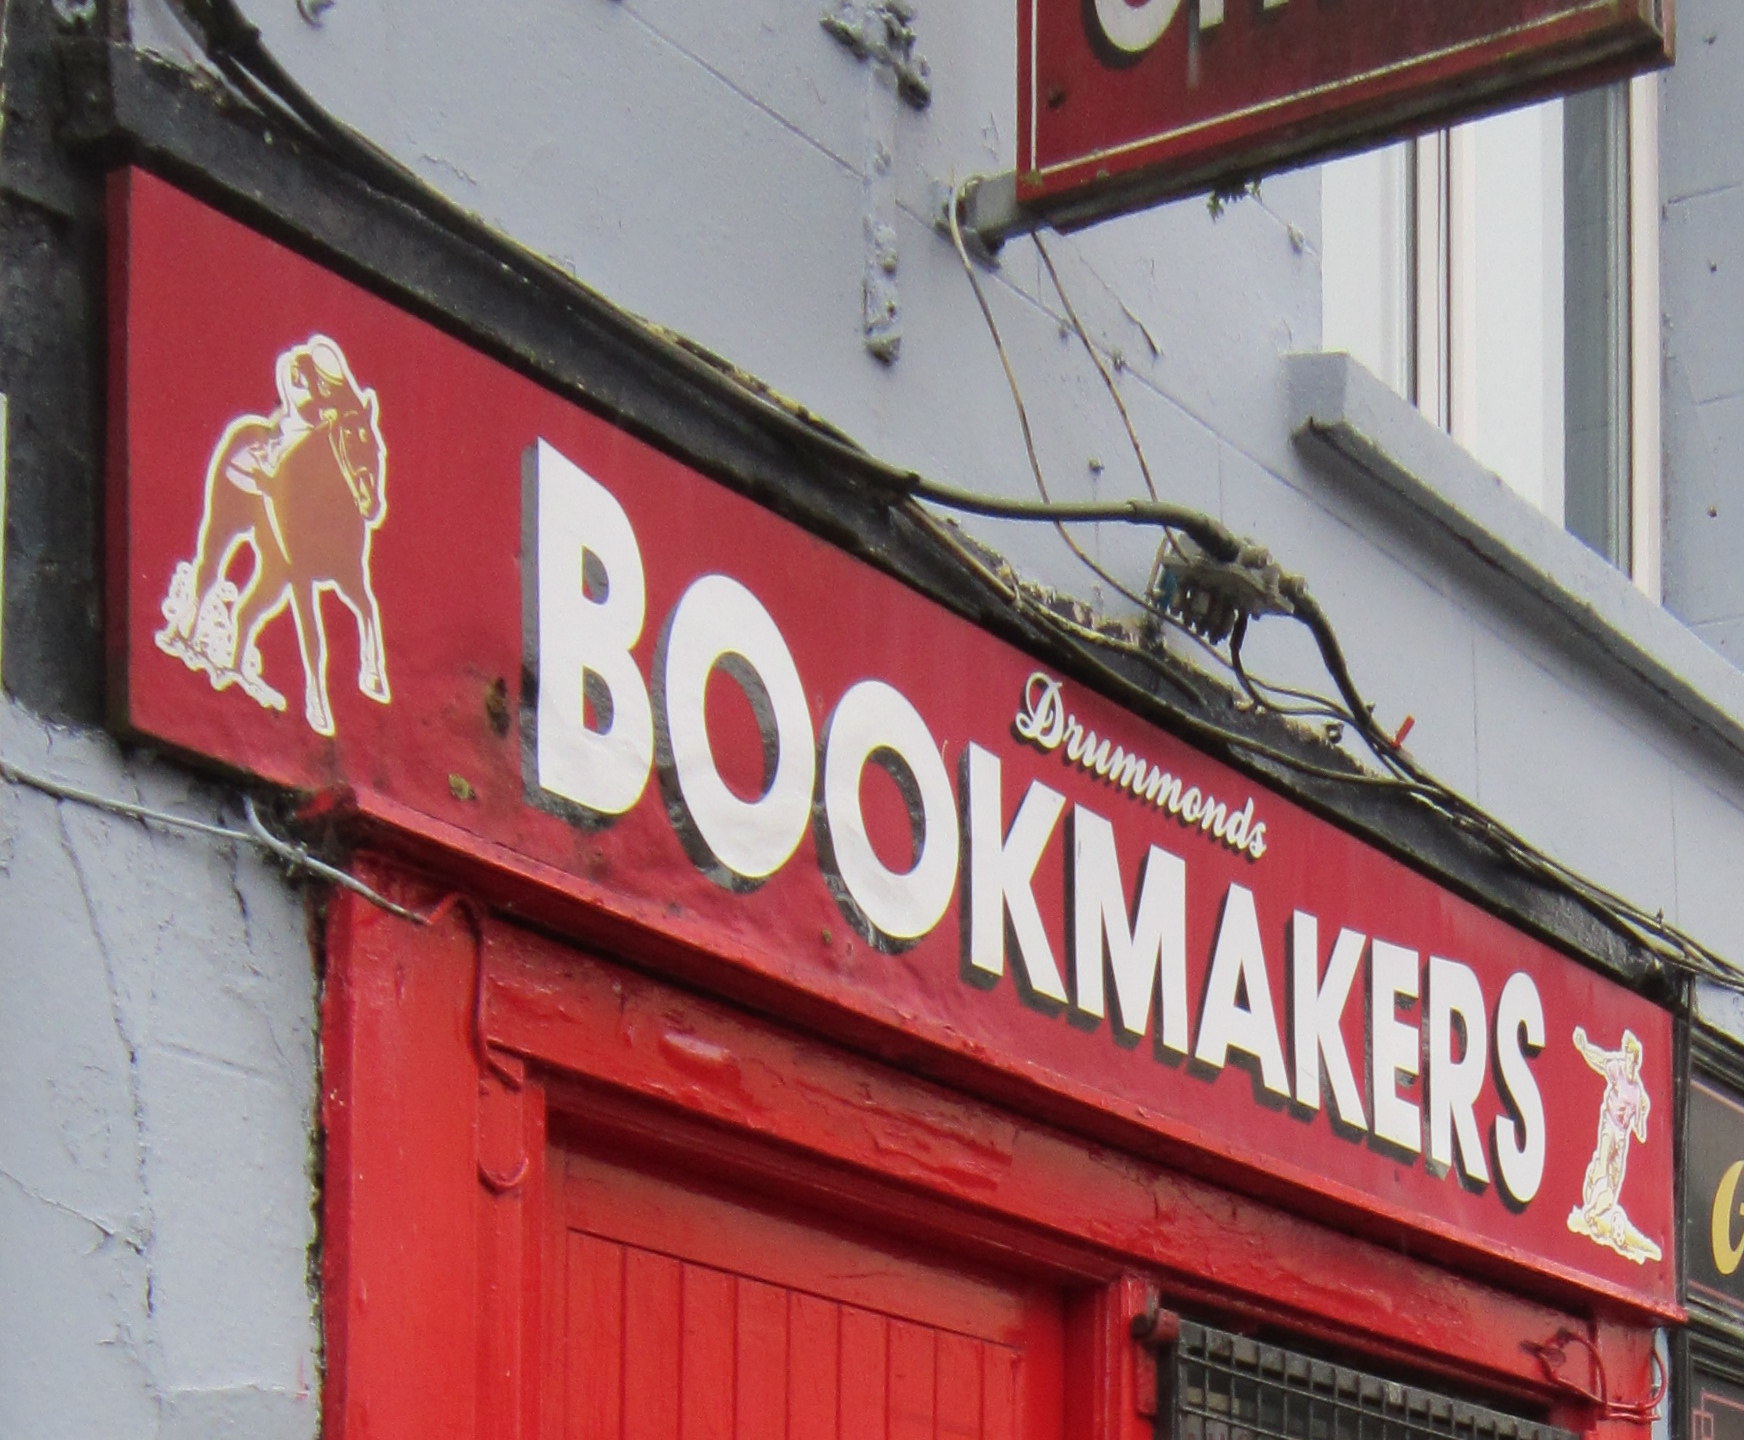 Red sign with image of jockey riding a horse and text that says Drummmonds Bookmakers